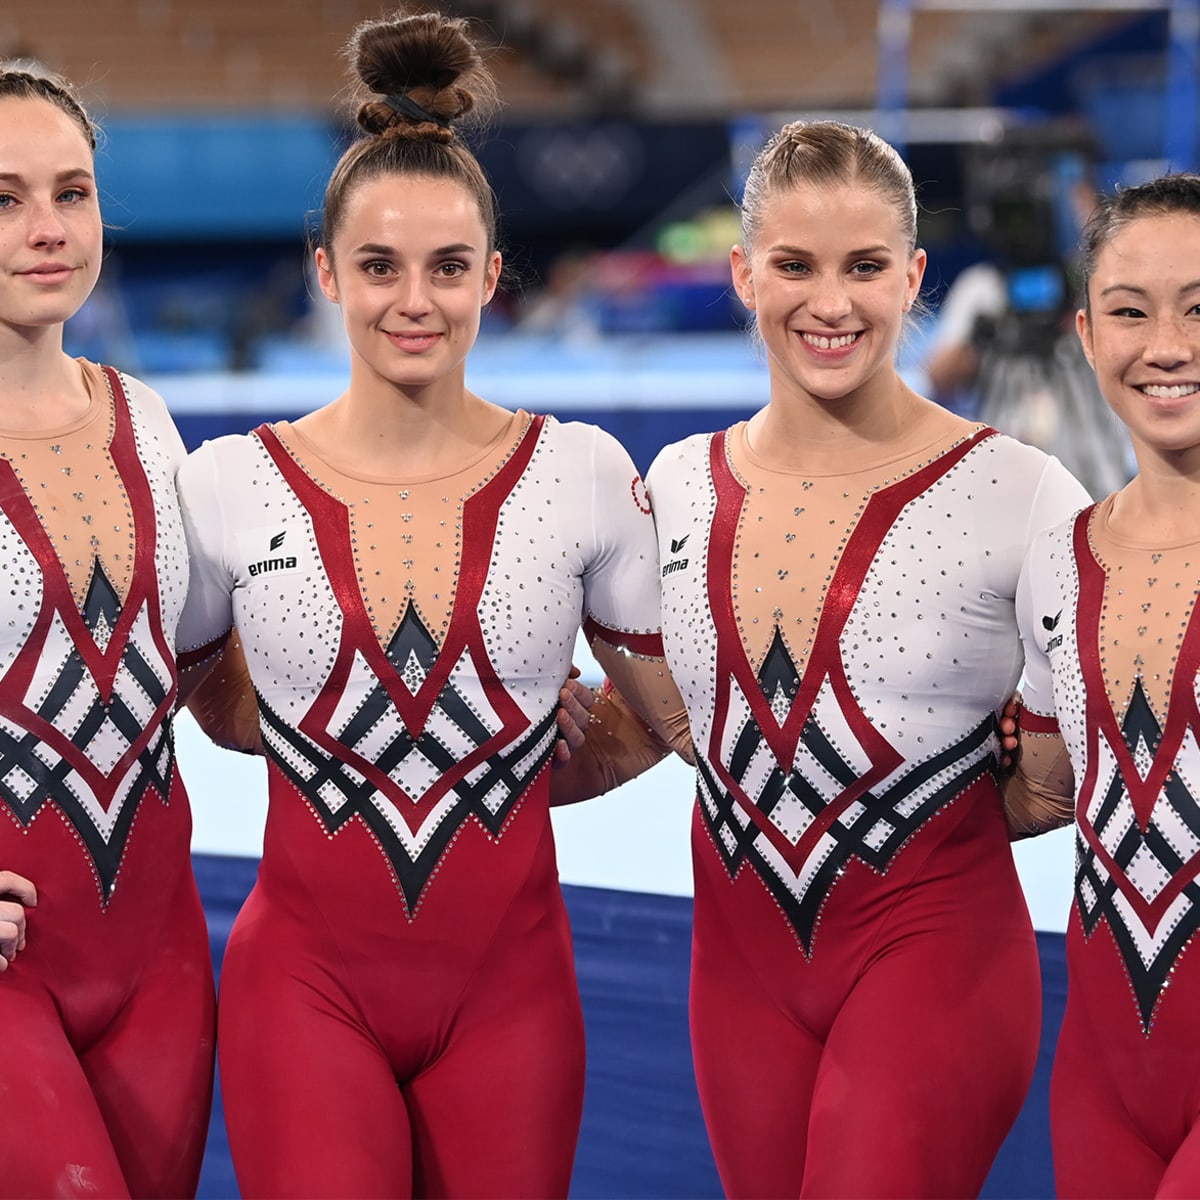 Olympics: Germany gymnastics team wears unitards, tired of 'sexualization'  - Sports Illustrated